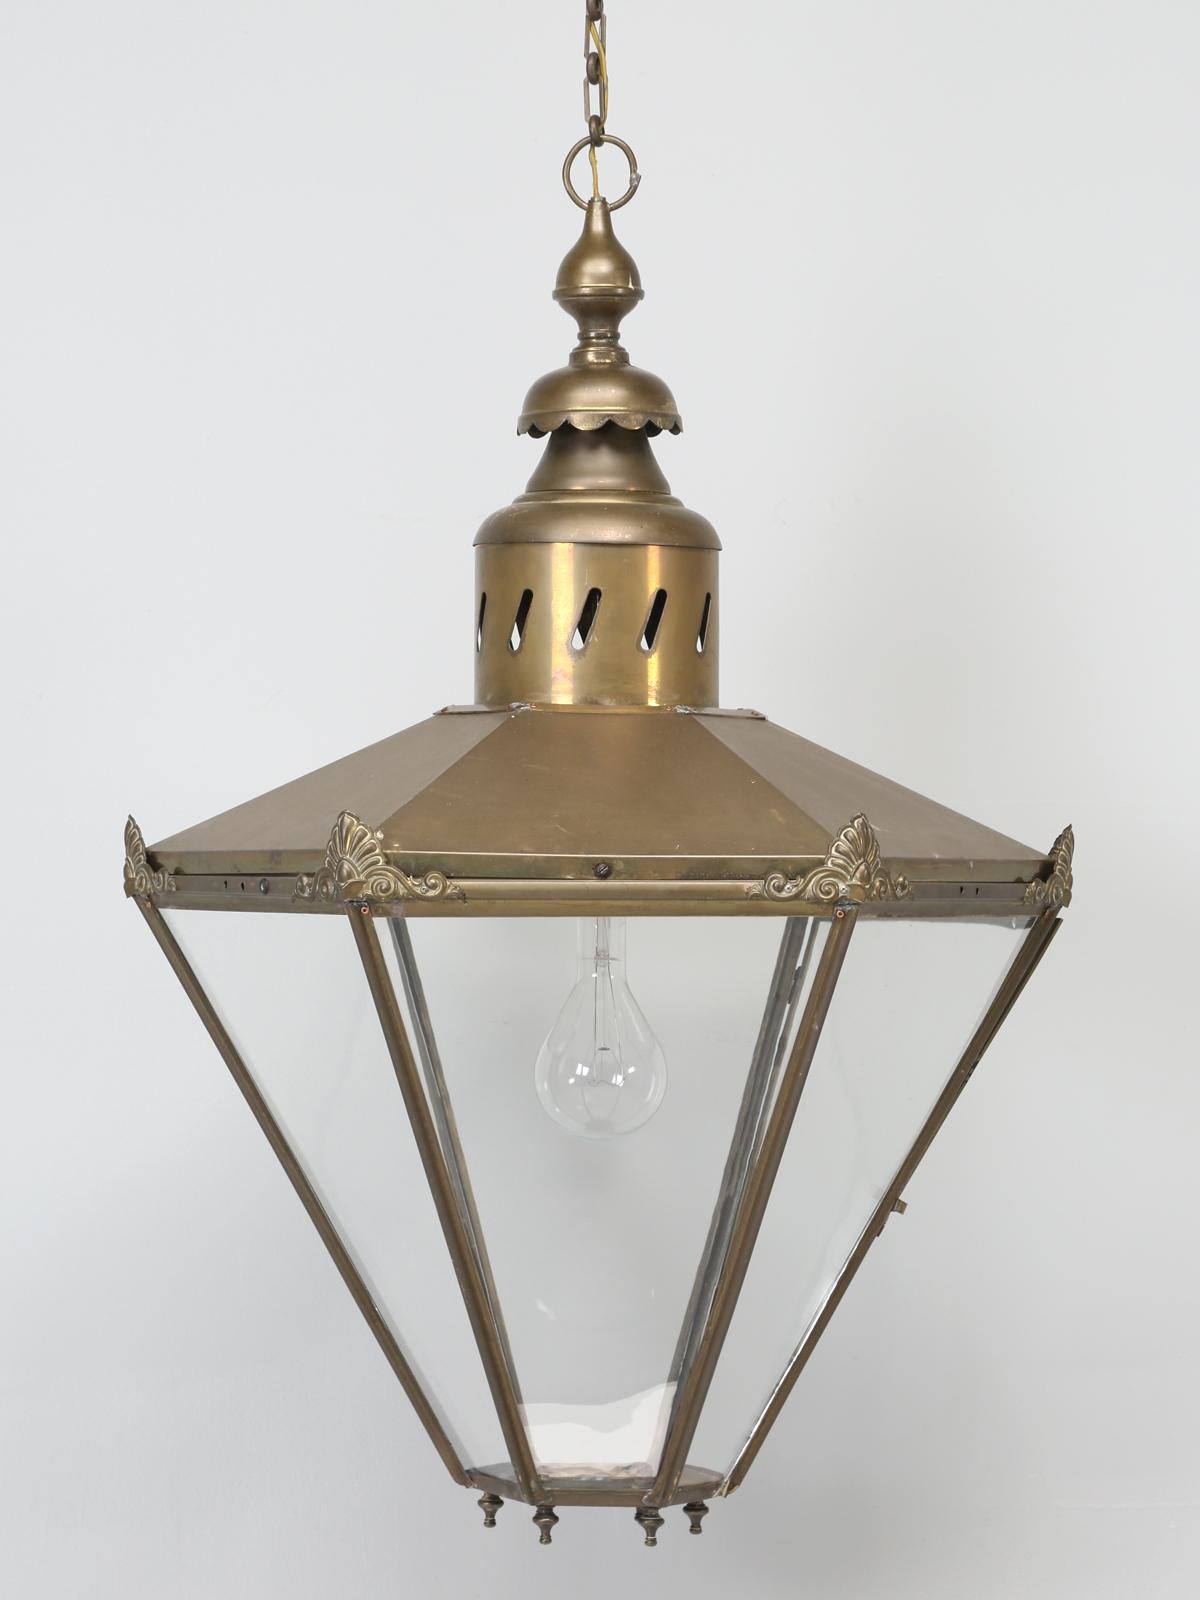 Antique French or possibly English, very large brass lantern. Although we purchased this antique brass lantern in France, there is a part of us, that thinks they could have originated in England? What we find most unusual about this antique lantern,